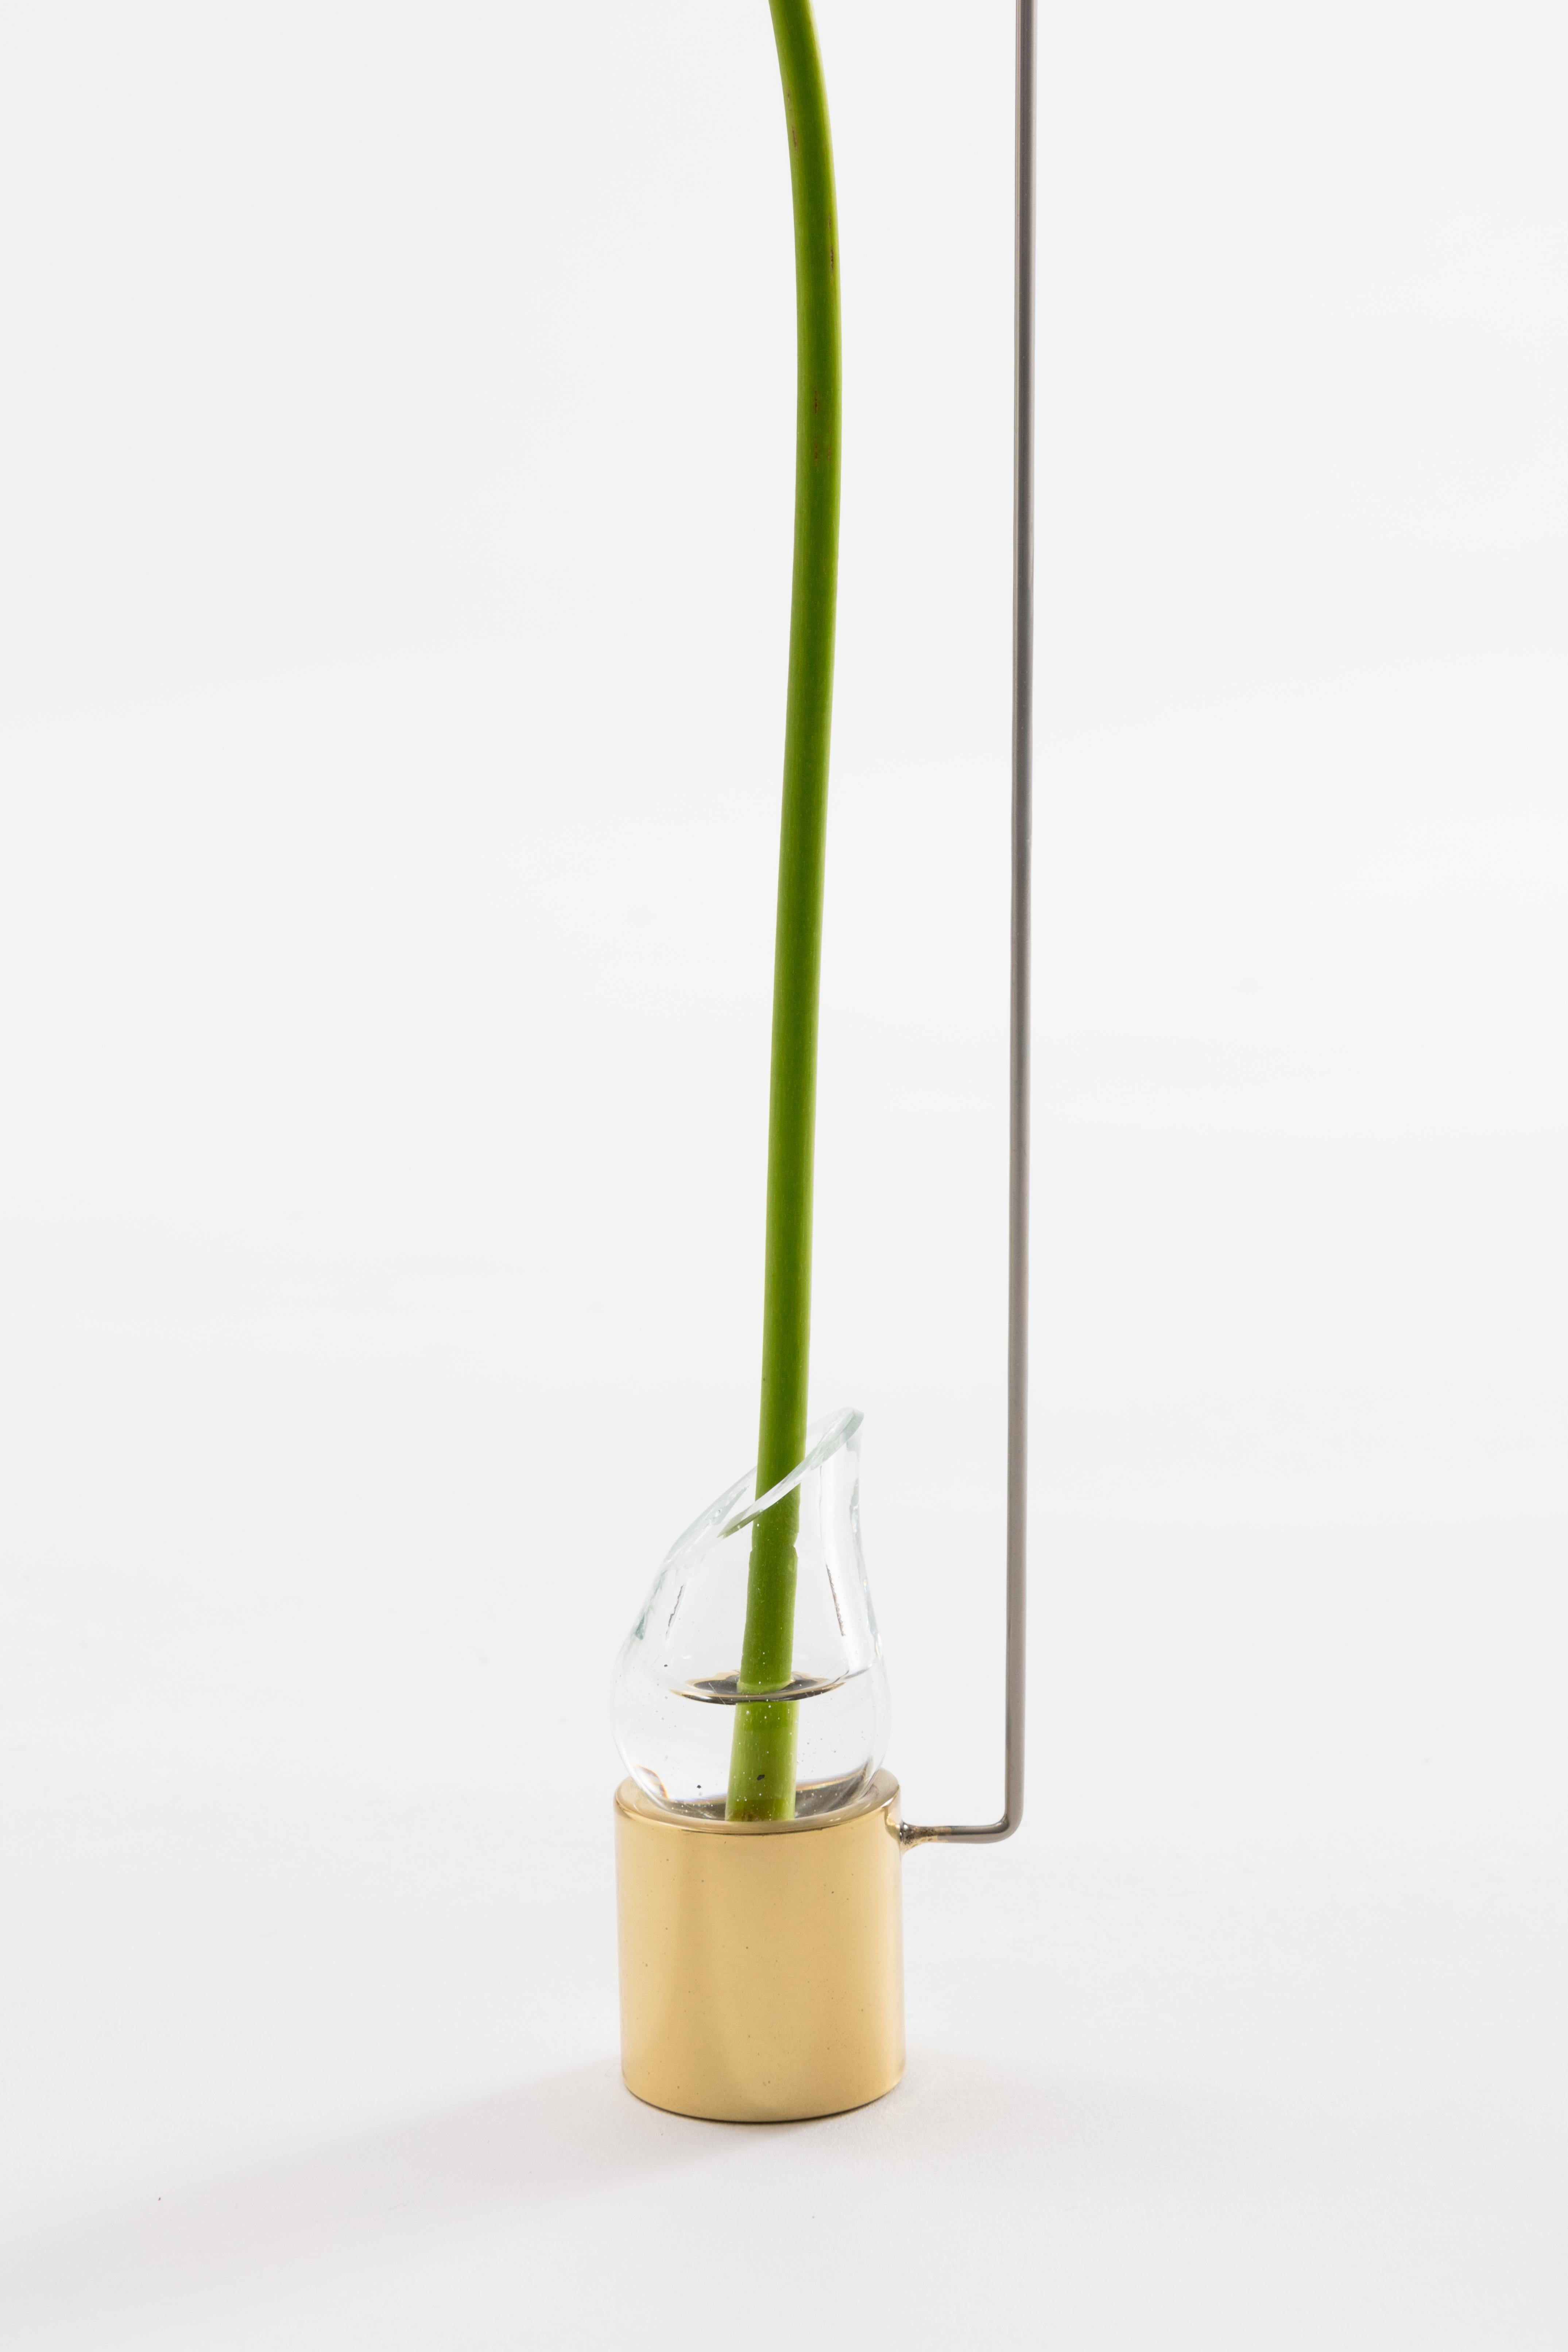 International Style Contemporary Minimalist Small Brass and Glass Solitary Vase For Sale